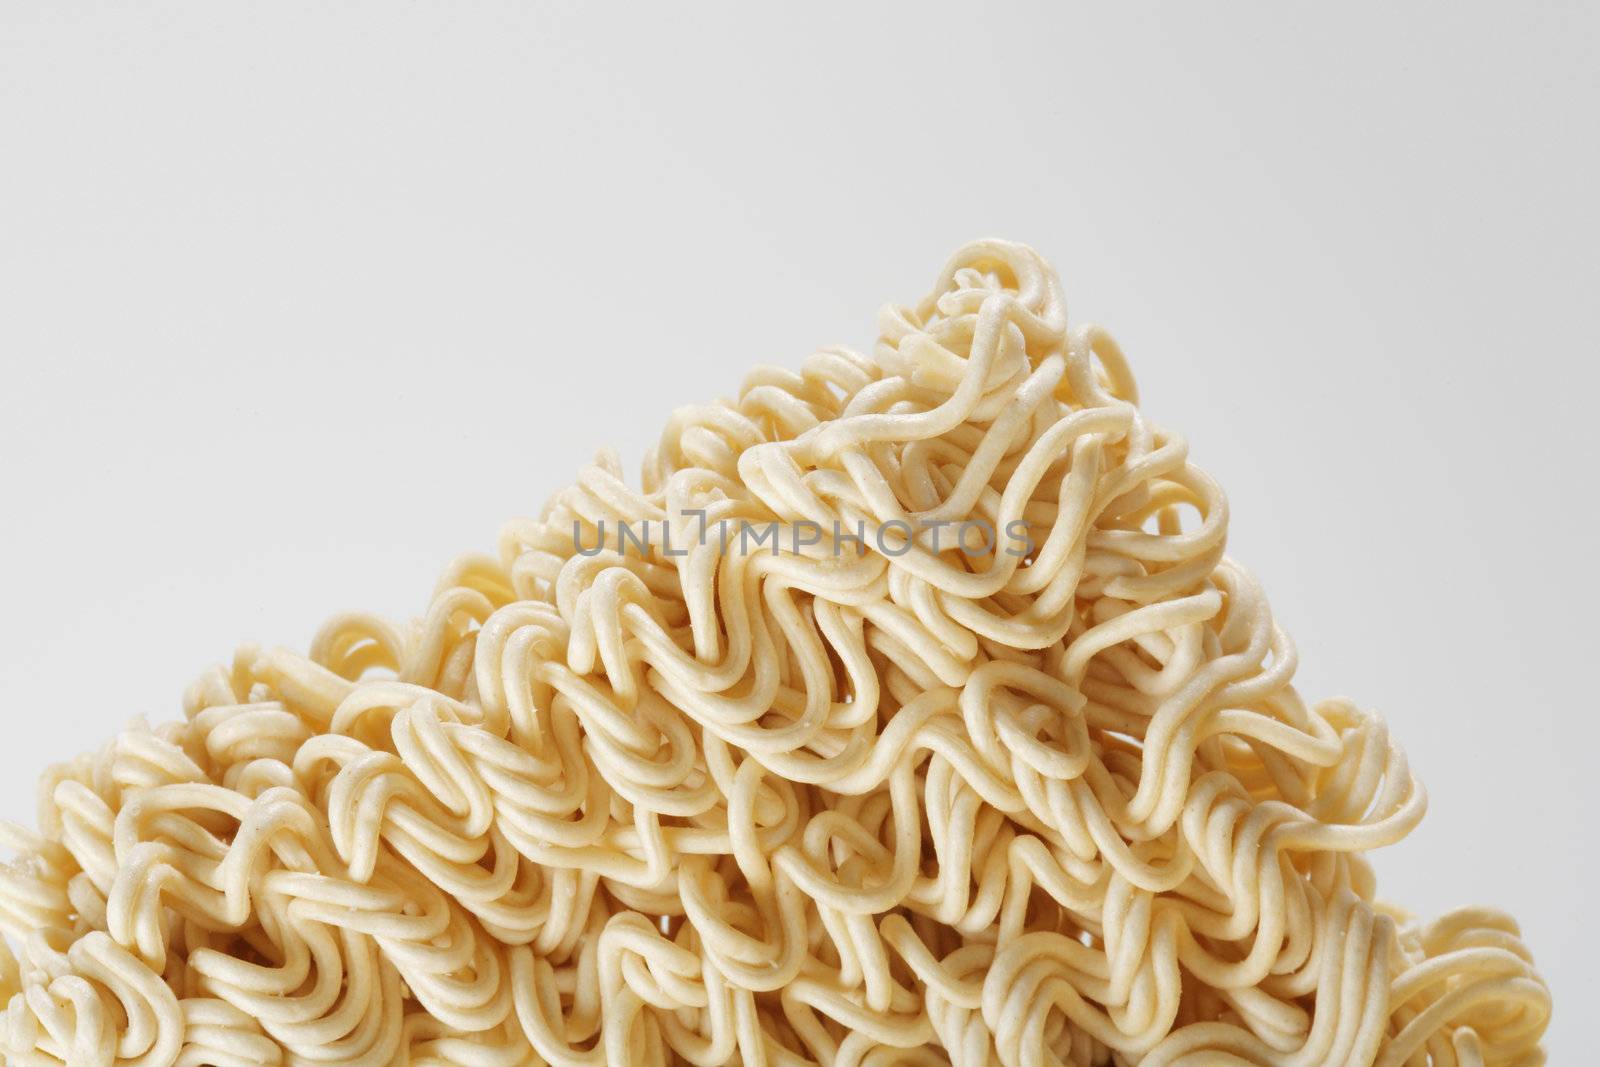 uncooked instant ramen noodles on grey background